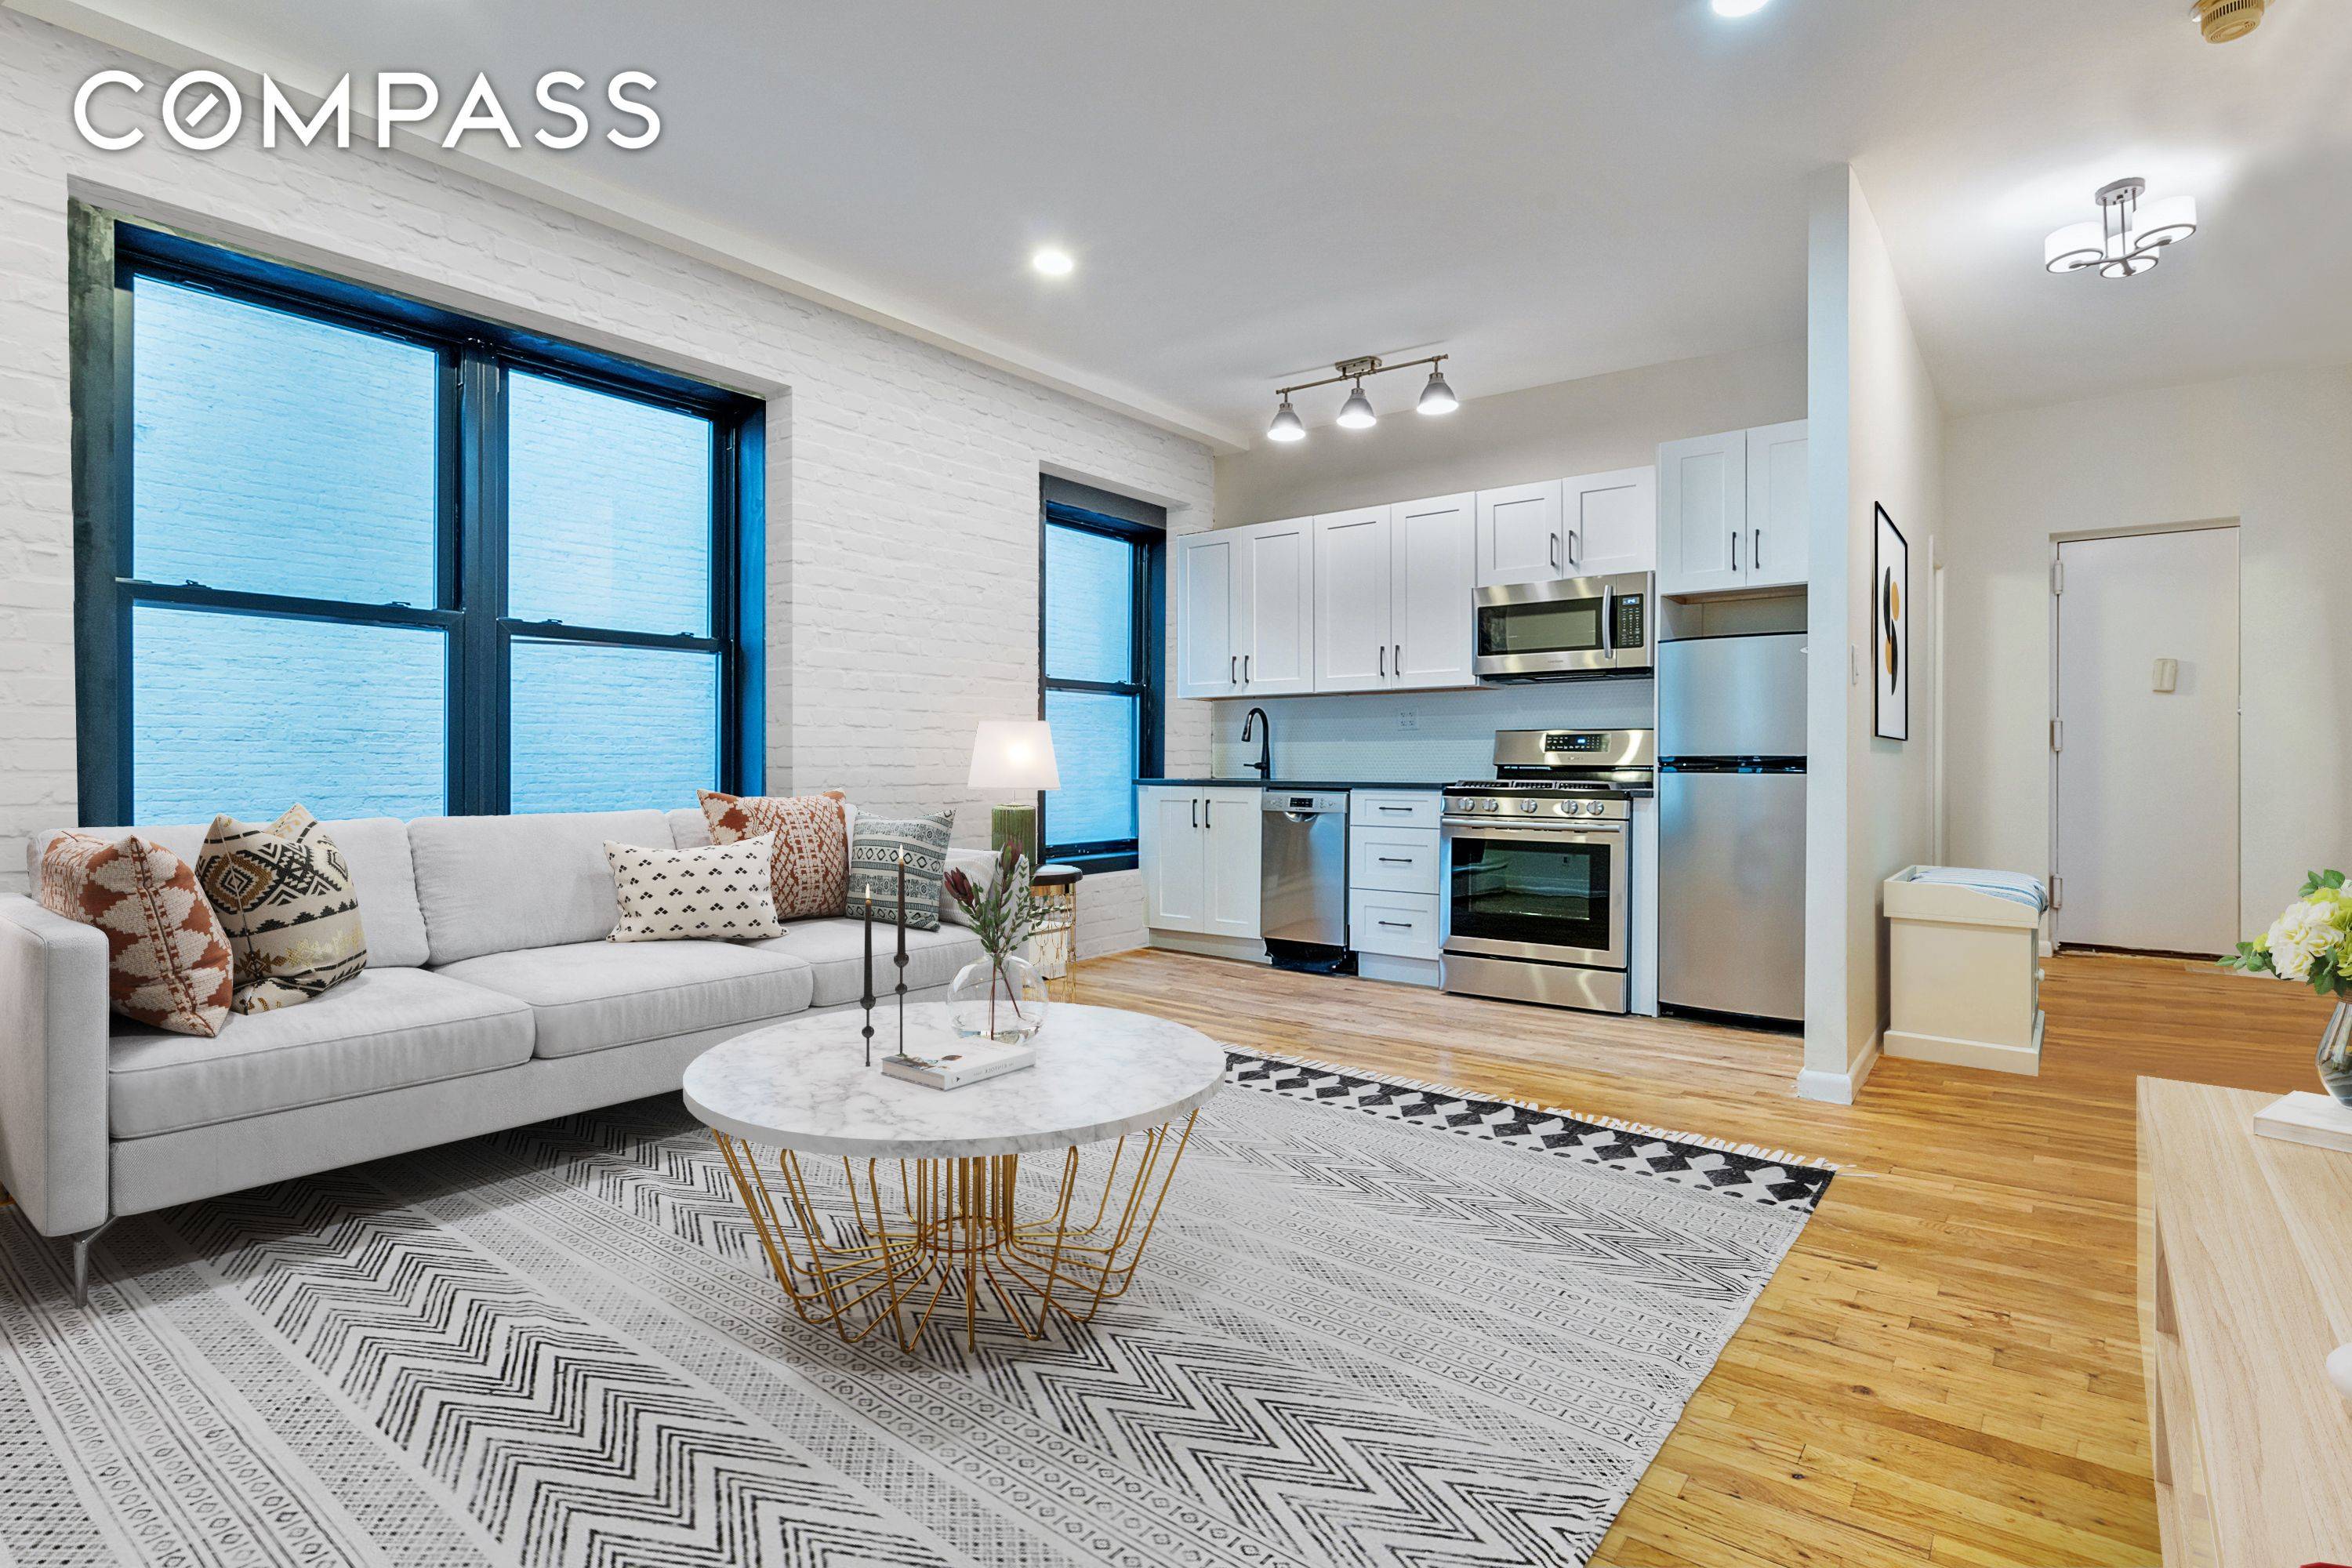 LOW MONTHLIES ! This well designed, move in ready 2 bedroom, loft style home will charm you instantly with its high ceilings, large windows, exposed brick, oak flooring and expansive ...